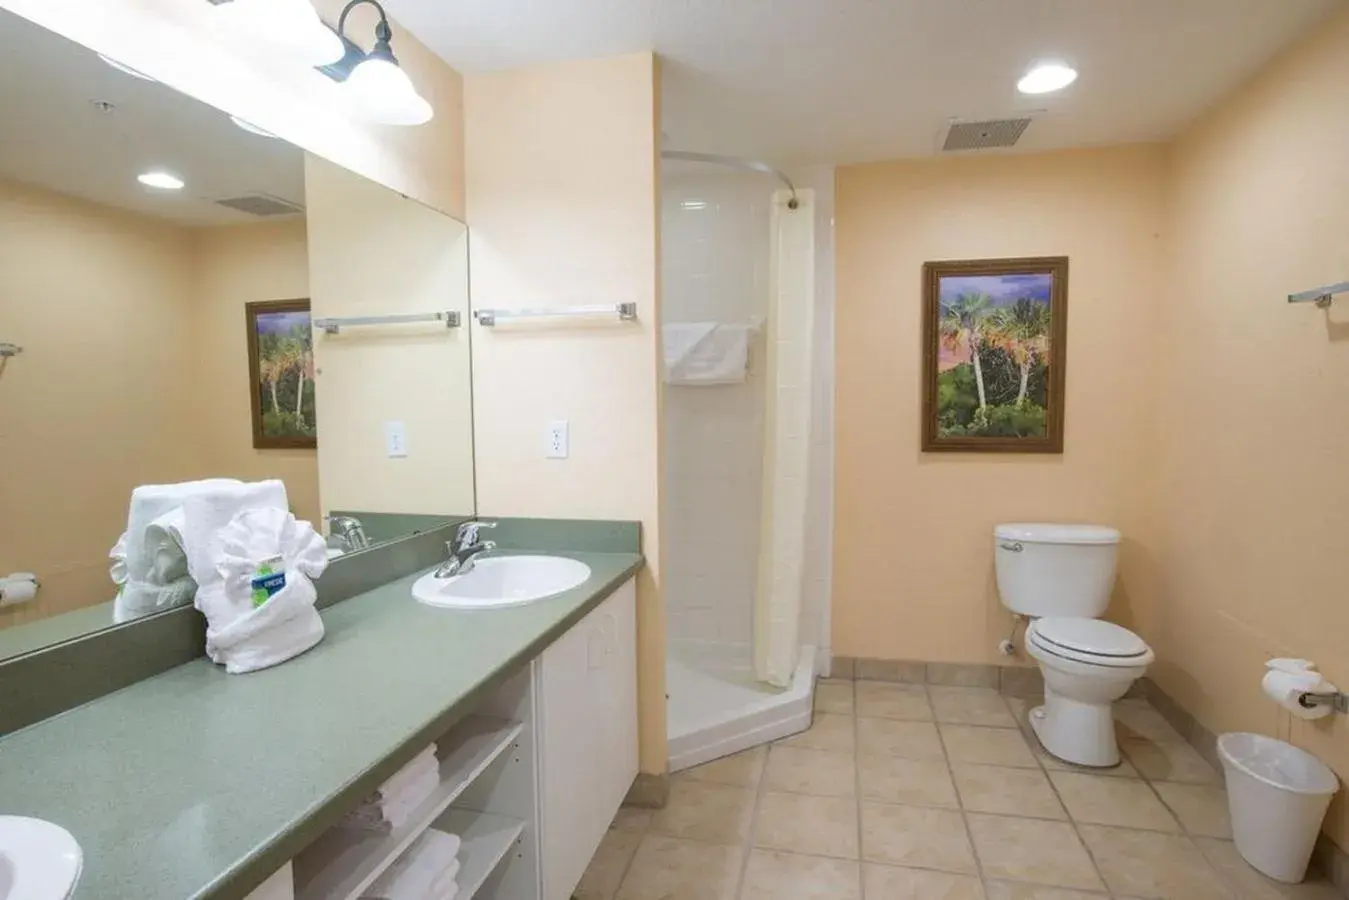 Shower, Bathroom in Vacation Village at Parkway